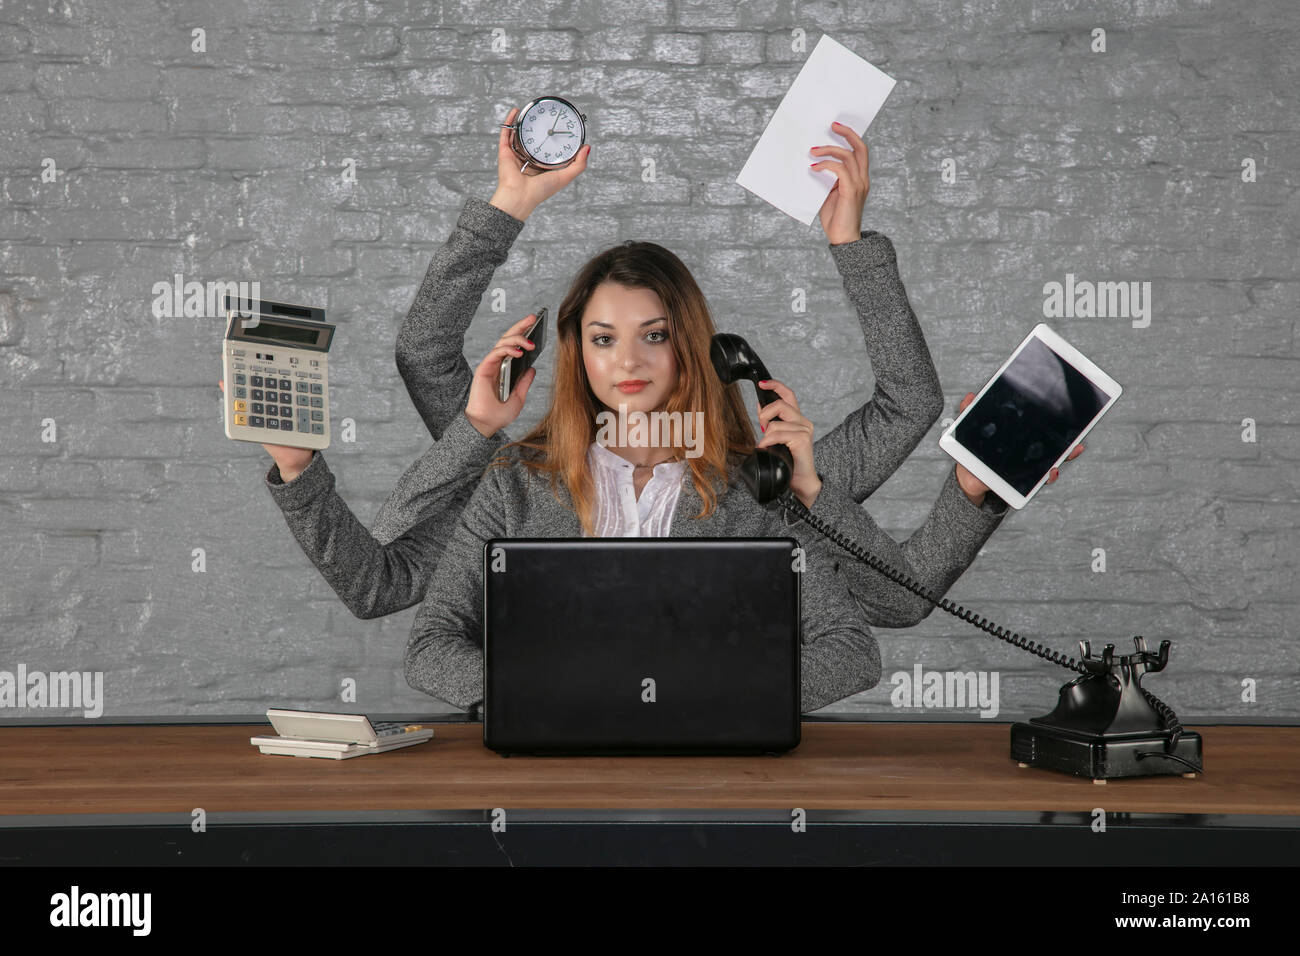 young business woman is irreplaceable in her position Stock Photo